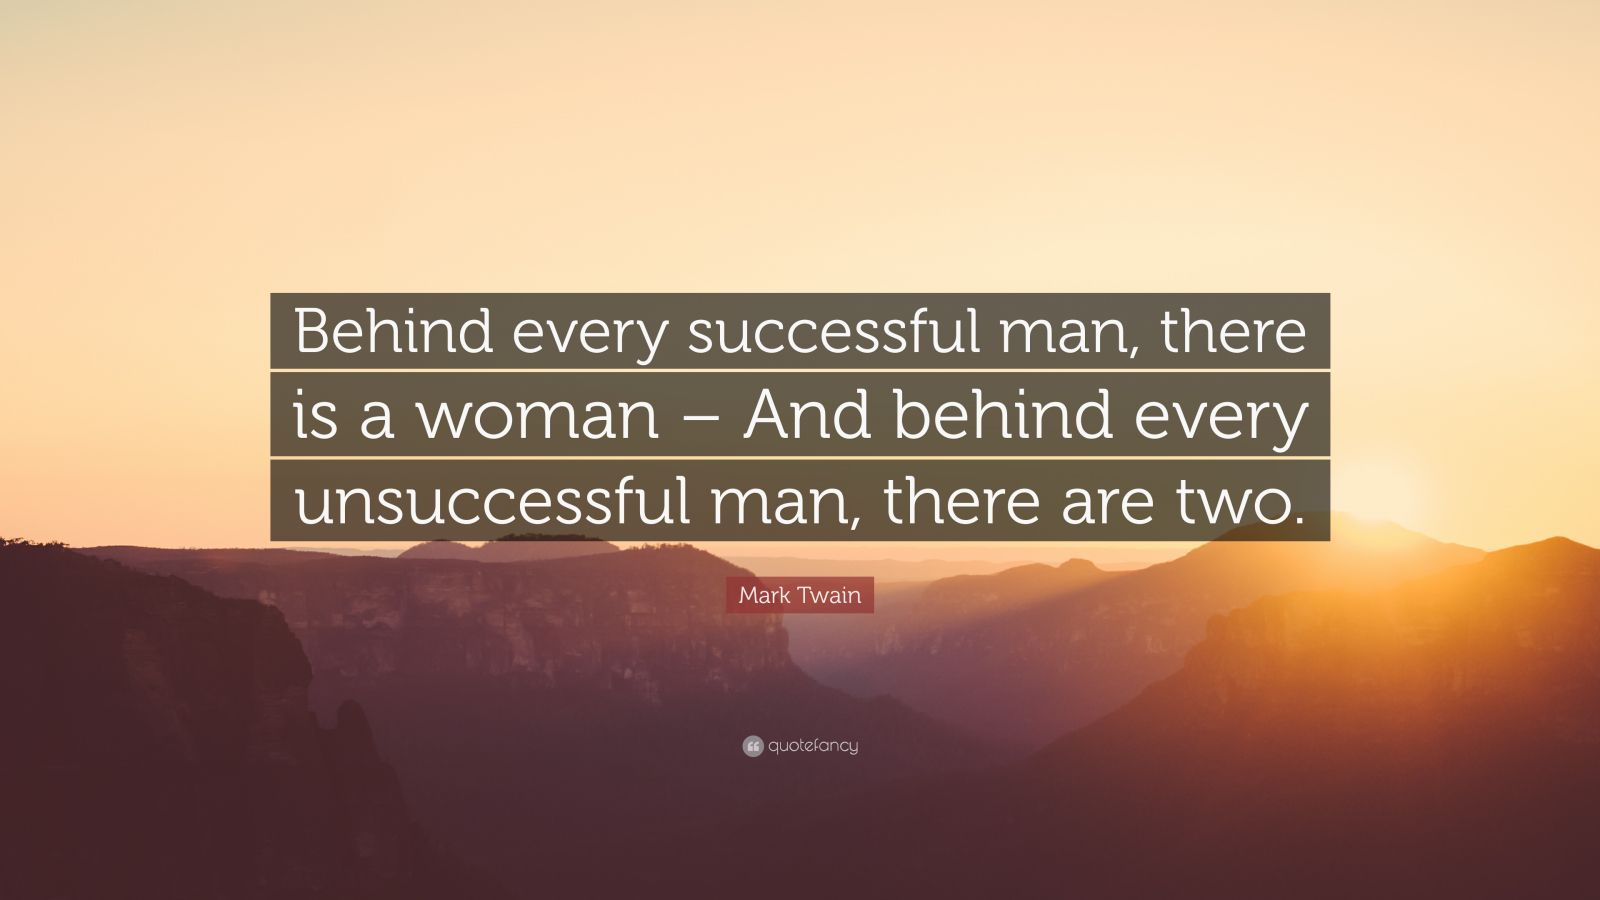 Mark Twain Quote: “Behind every successful man, there is a woman – And